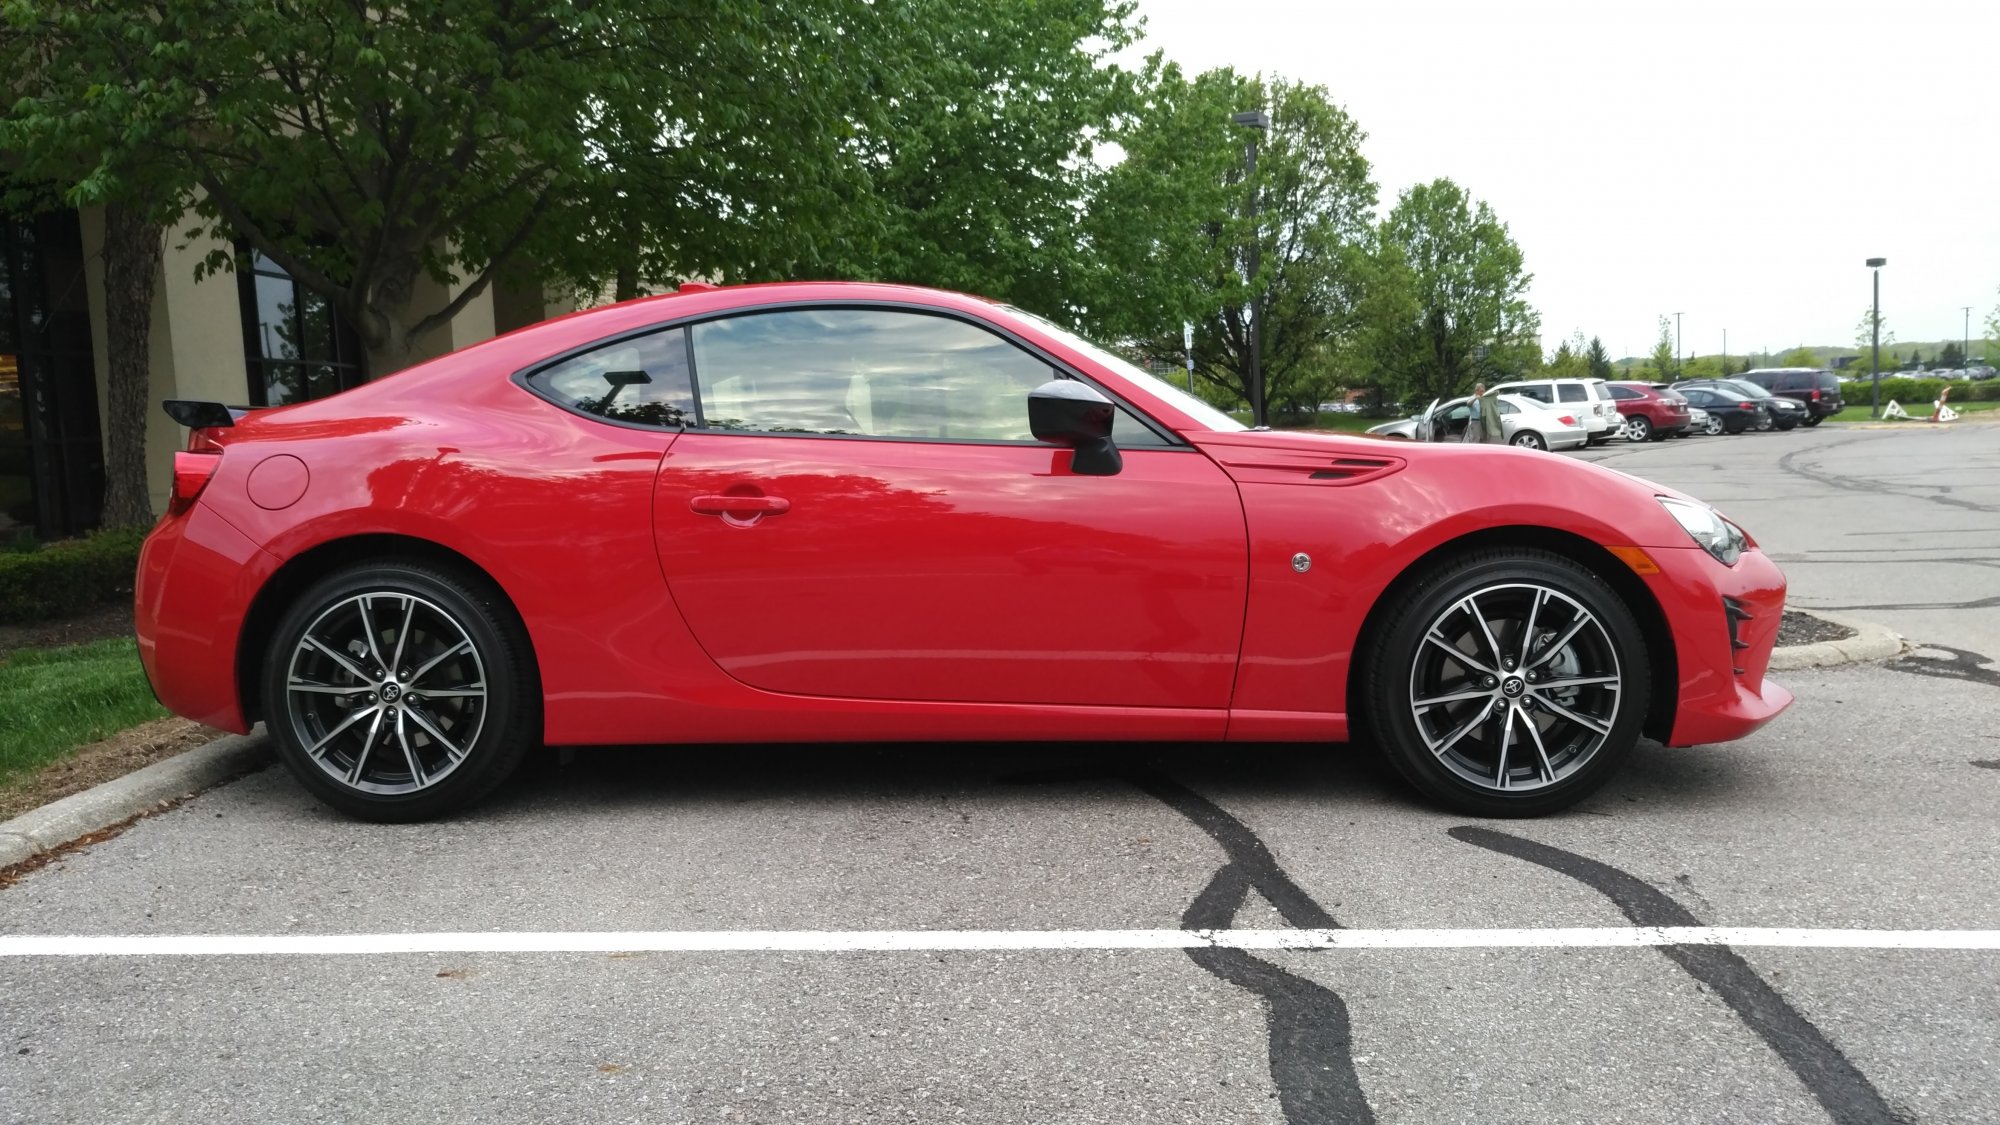 Toyota 86 - My car - Right side view parked at office.jpg